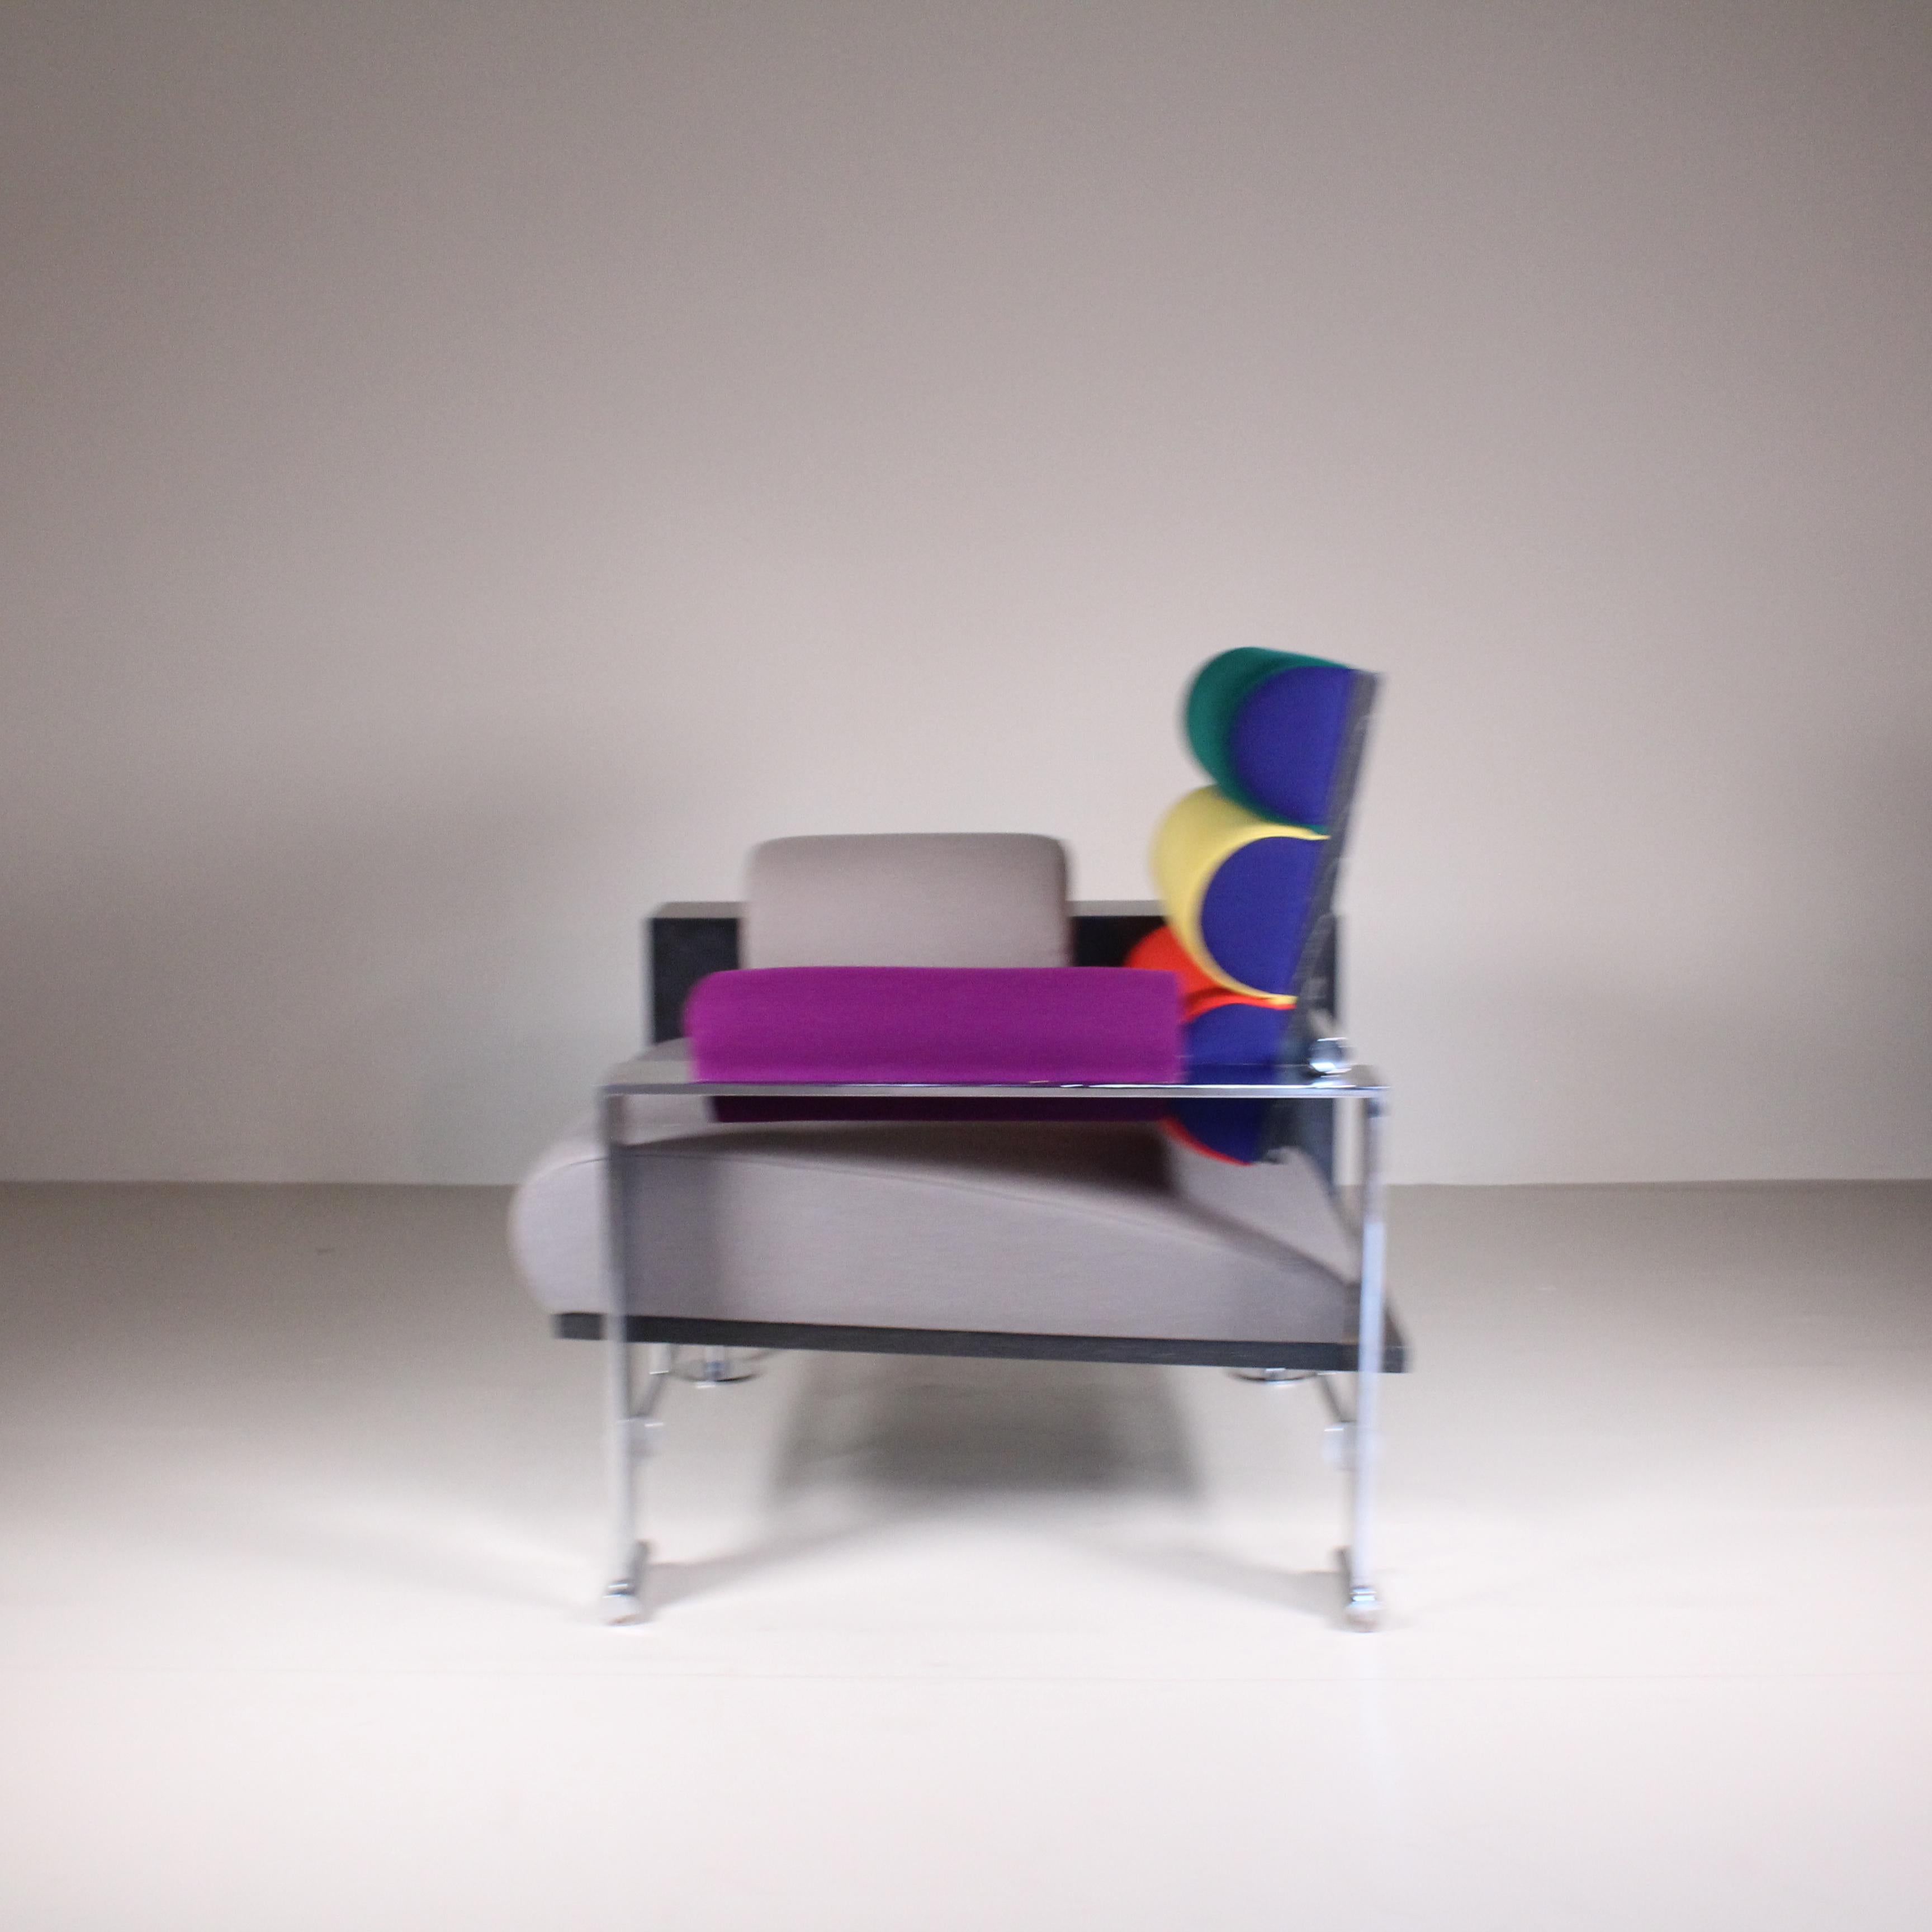 Metal Las Vegas armchair by Peter Shire, 1988 For Sale